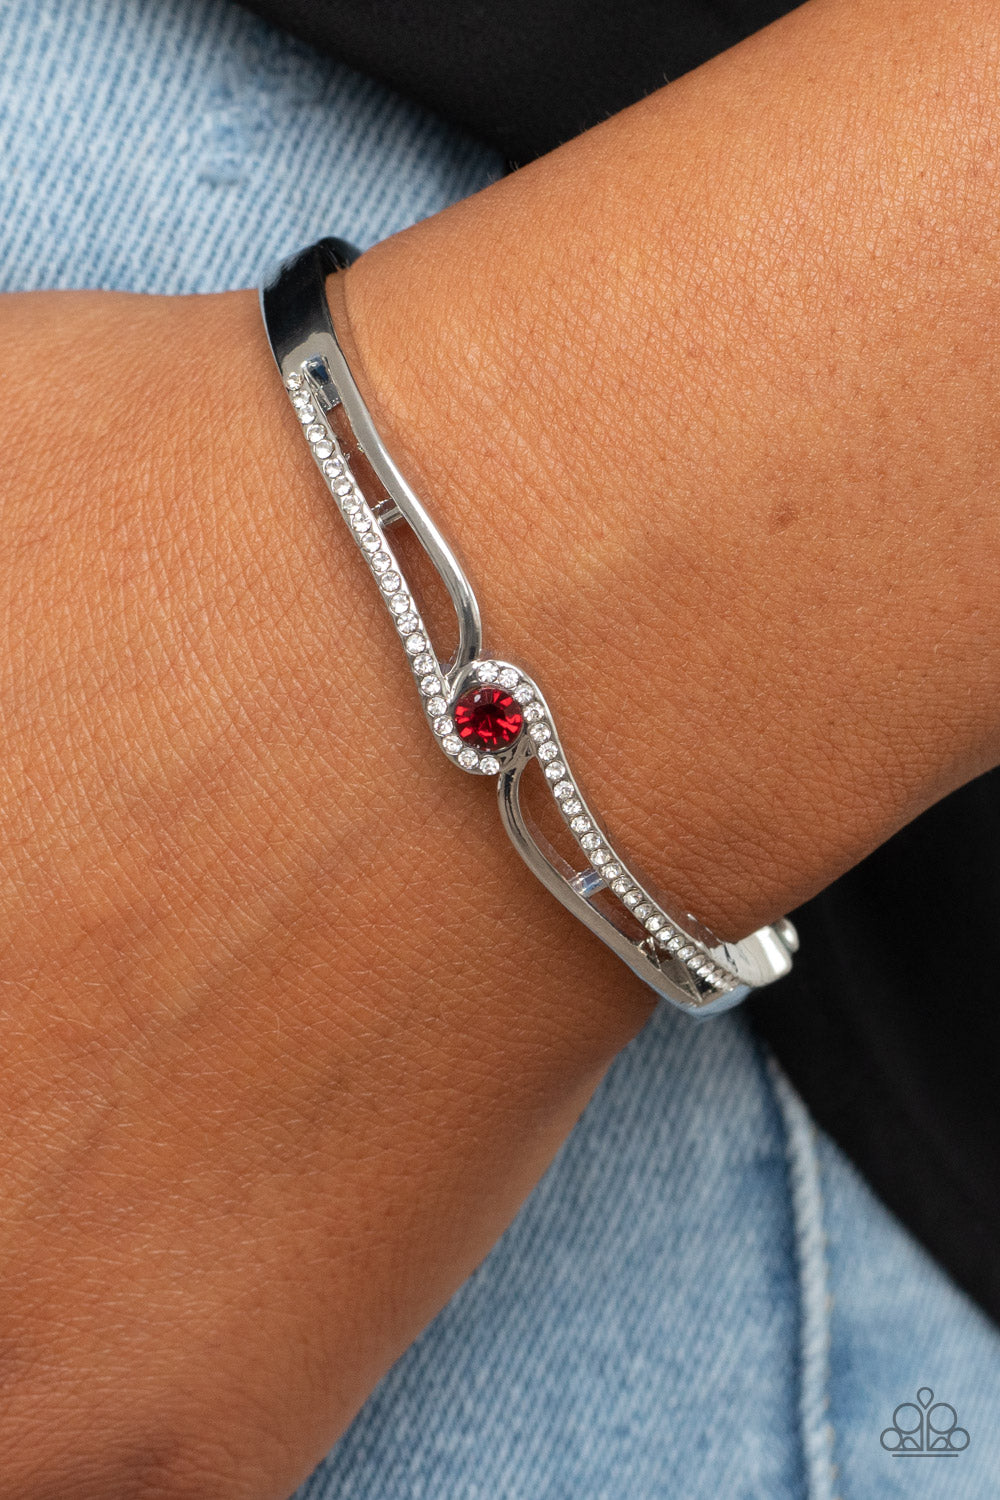 Top Shelf Shimmer - Silver with Red Accent Bracelet